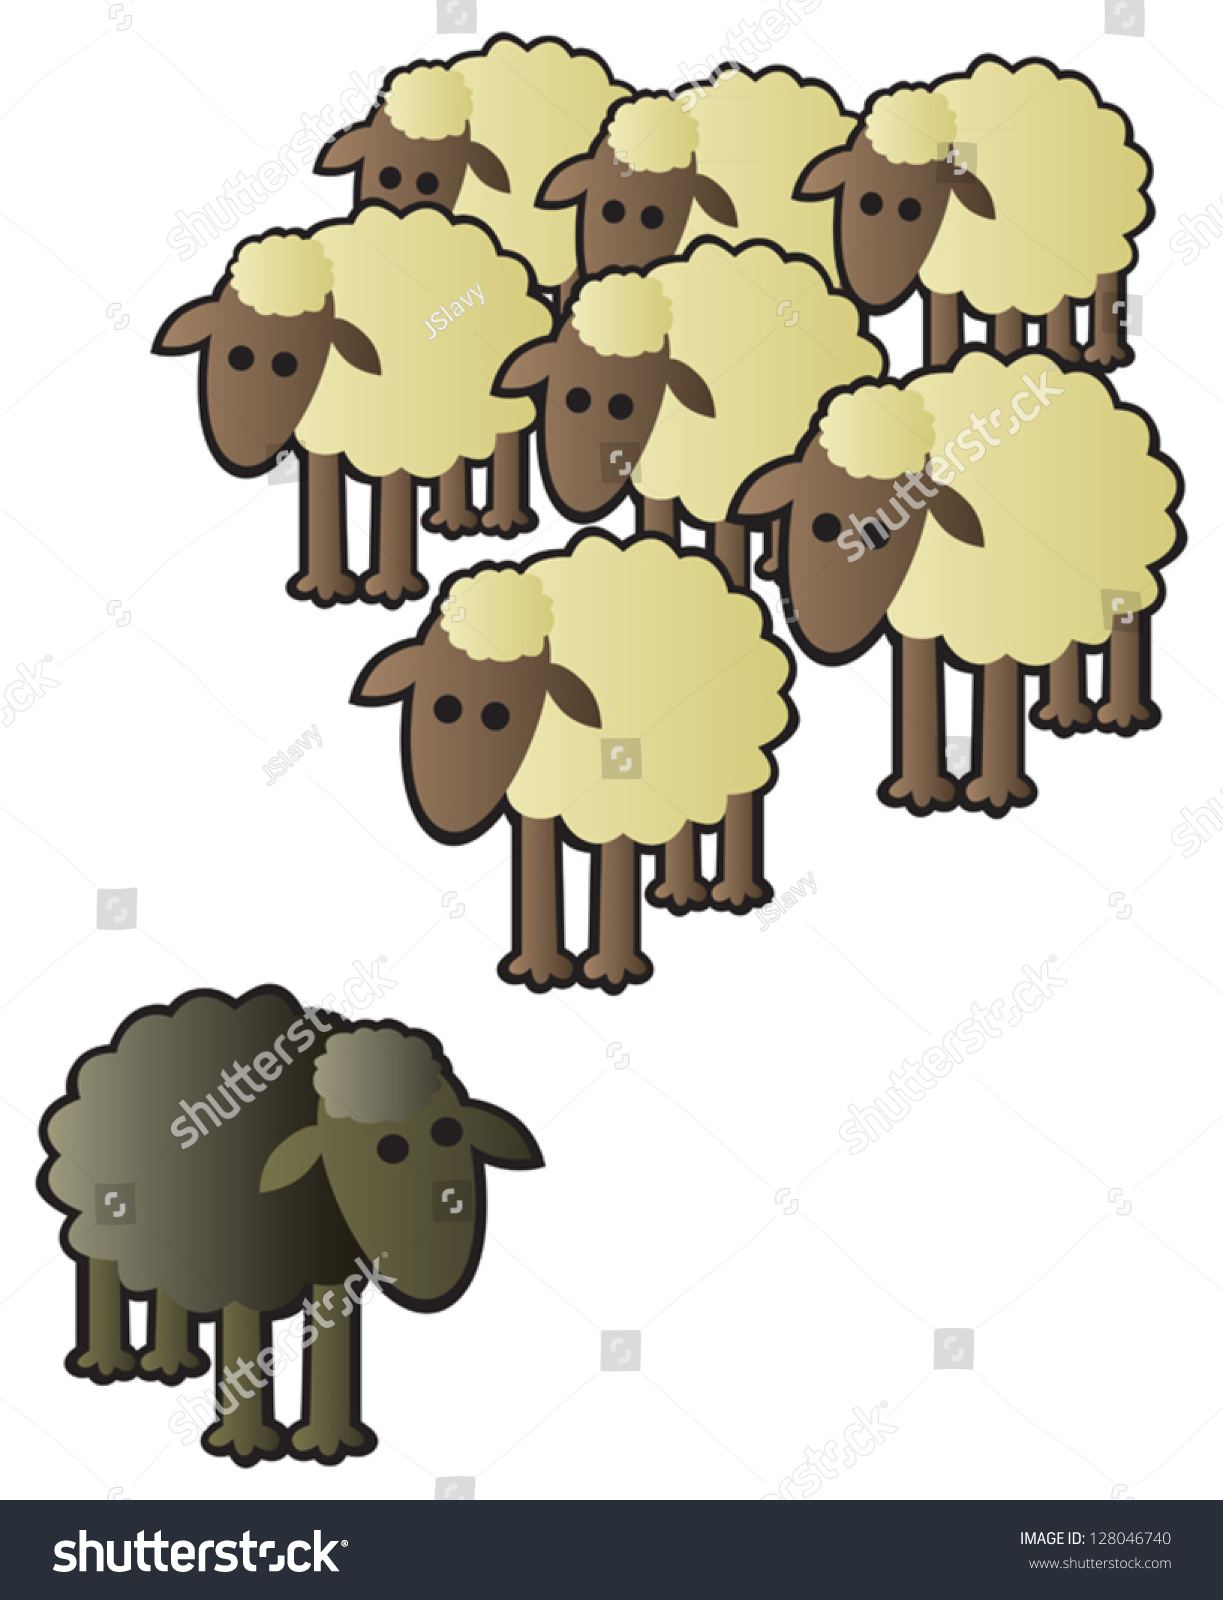 stock-vector-a-black-sheep-being-shunned-from-the-rest-of-the-flock-for-being-different-128046740.jpg